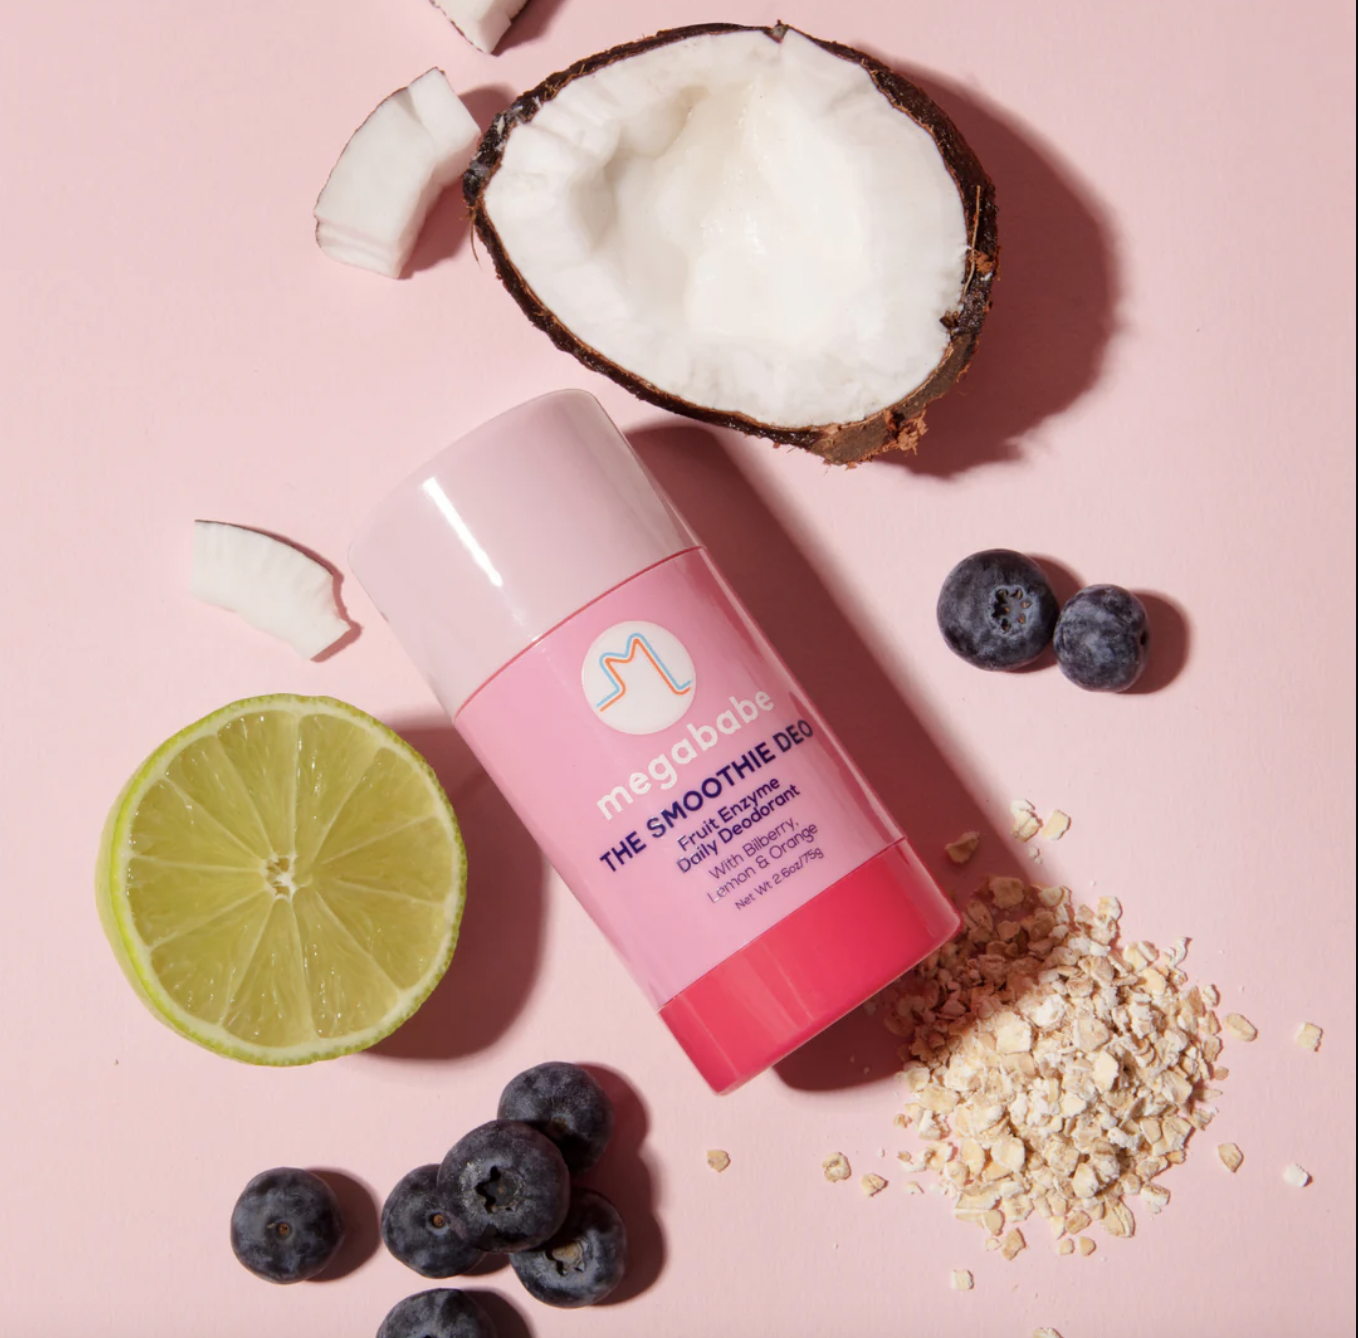 <p class="body-dropcap">Finding the right antiperspirant or <a href="https://go.redirectingat.com?id=74968X1553576&url=https%3A%2F%2Fwww.harpersbazaar.com%2Fbeauty%2Fskin-care%2Fg28570084%2Fbest-aluminum-free-deodorants%2F&sref=https%3A%2F%2Fwww.harpersbazaar.com%2Fbeauty%2Fhealth%2Fg60141967%2Fbest-deodorant-brands%2F">deodorant</a> (yes, <a href="https://go.redirectingat.com?id=74968X1553576&url=https%3A%2F%2Fwww.harpersbazaar.com%2Fbeauty%2Fhealth%2Fg46075752%2Fbest-deodorants-for-women%2F&sref=https%3A%2F%2Fwww.harpersbazaar.com%2Fbeauty%2Fhealth%2Fg60141967%2Fbest-deodorant-brands%2F">two different things</a>) comes down to a few factors. Do you want scented or unscented? Do you need <a href="https://go.redirectingat.com?id=74968X1553576&url=https%3A%2F%2Fwww.harpersbazaar.com%2Fbeauty%2Fskin-care%2Fg44269015%2Fbest-deodorant-for-sensitive-skin%2F&sref=https%3A%2F%2Fwww.harpersbazaar.com%2Fbeauty%2Fhealth%2Fg60141967%2Fbest-deodorant-brands%2F">one formulated for sensitive skin</a>? Are you looking for extra sweat protection? But at the end of the day, most of us—experts included—start by looking to deodorant brands we trust. </p><p>"Generally, I prefer brands that are affordably priced or give significant value if they are on the more expensive end of the spectrum," says <a href="https://www.nydermatologygroup.com/experts/carmen-castilla-md">Carmen Castilla</a>, a board-certified dermatologist at New York Dermatology Group and clinical instructor at Mount Sinai Hospital. Specifically, she supports "brands who listen to consumers but are not just jumping on trends and are thoughtful in their formulations. Brands that offer options specifically for sensitive skin patients but other products in the line are also generally non-irritating." All sounds pretty great, right?</p><p>To help you narrow down your search, we gathered 16 of the best deodorant brands, including Castilla's picks, below.</p>